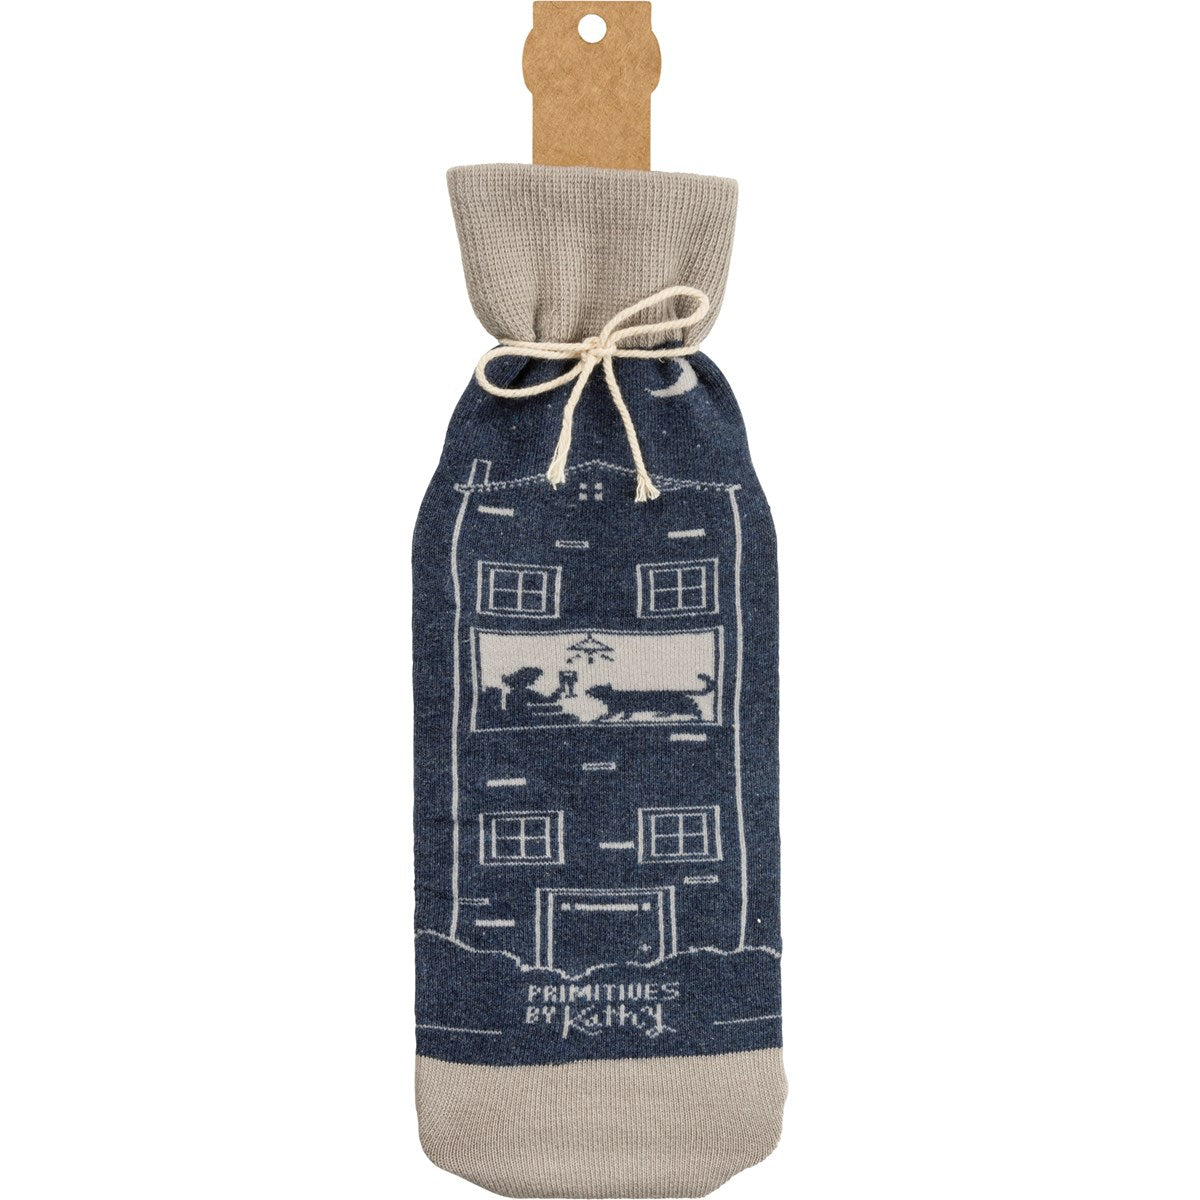 Not drinking alone if Cat is Home Wine Bottle Sock Gift Bag